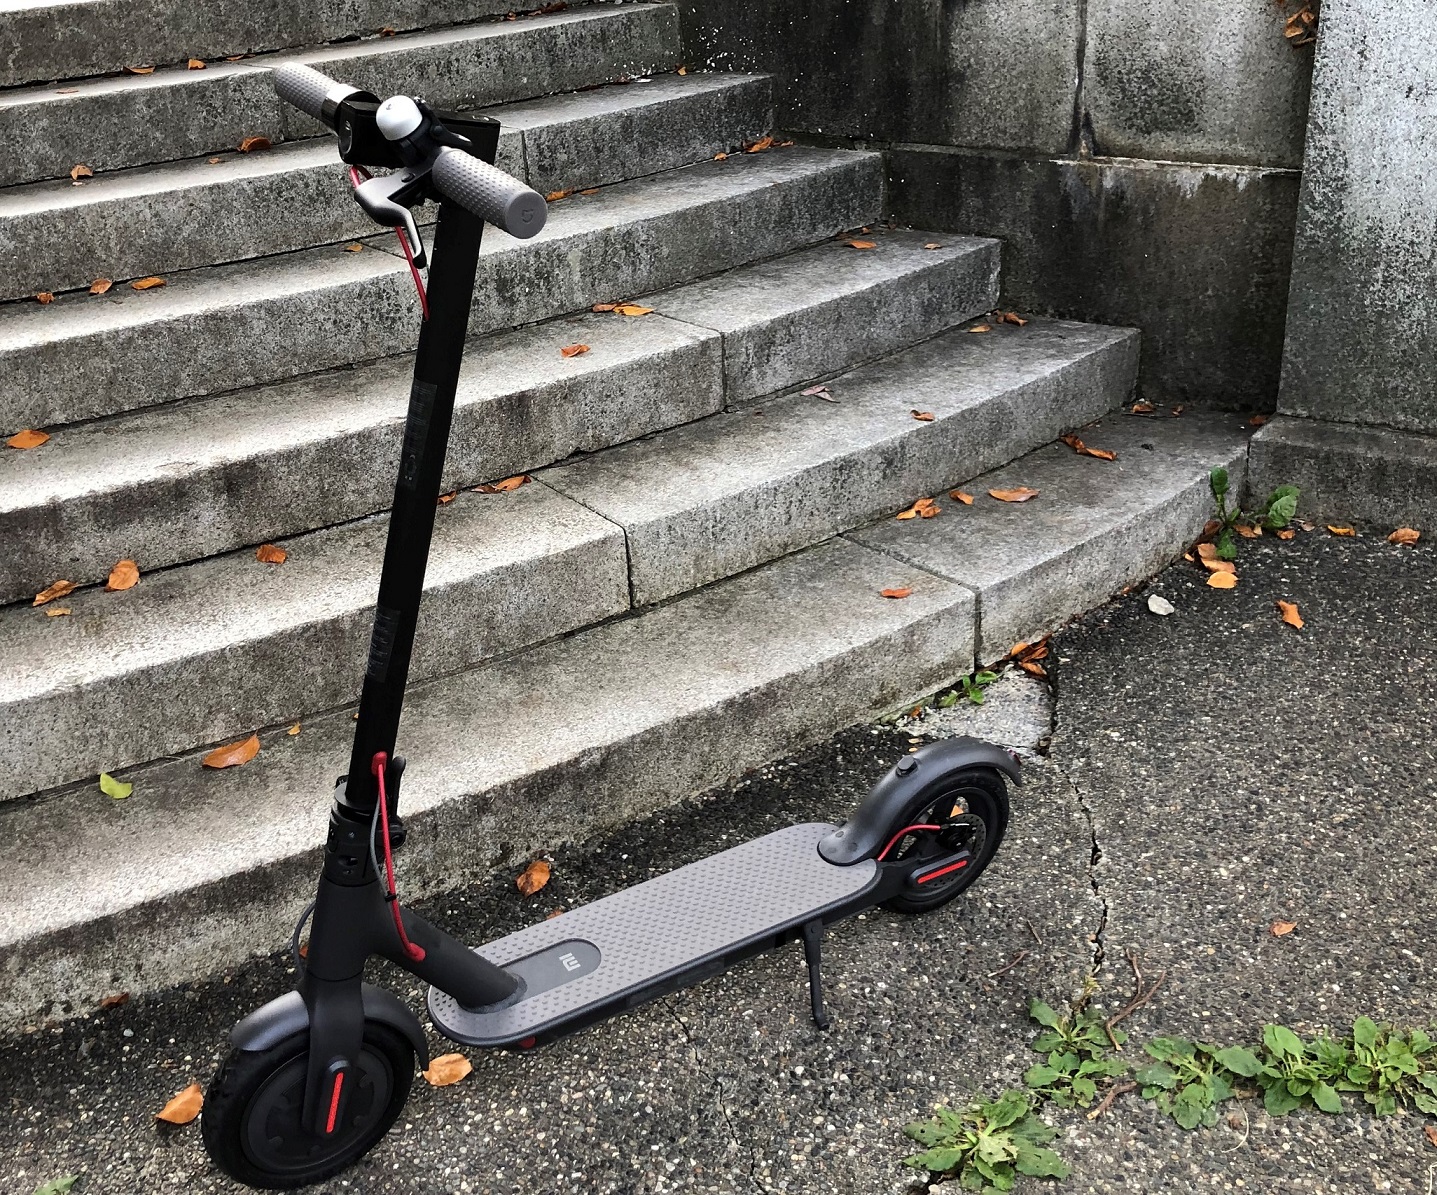 https://blogue.bestbuy.ca/wp-content/uploads/sites/3/2019/11/Mi-Electric-Scooter-Featured-Image.jpg